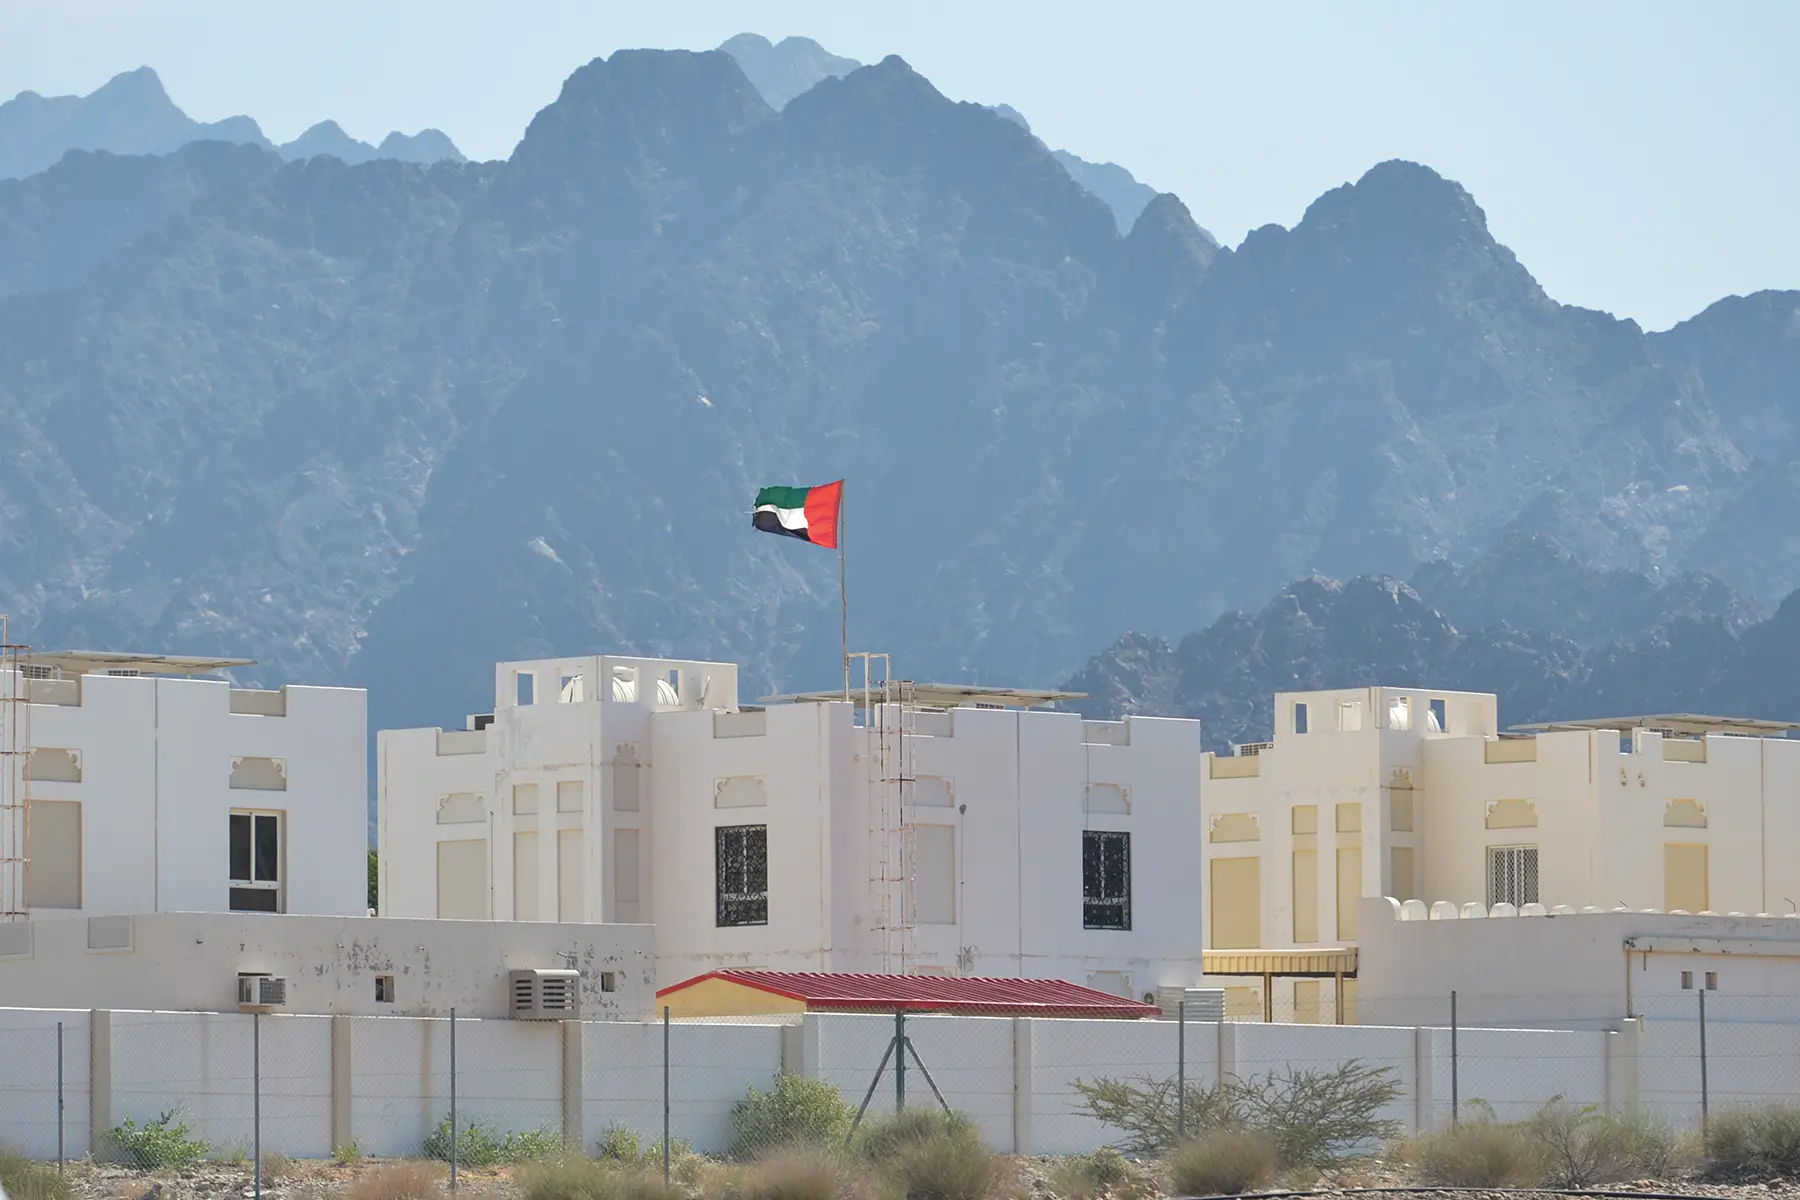 Houses in front of mountains with a UAE flag flying from the roof